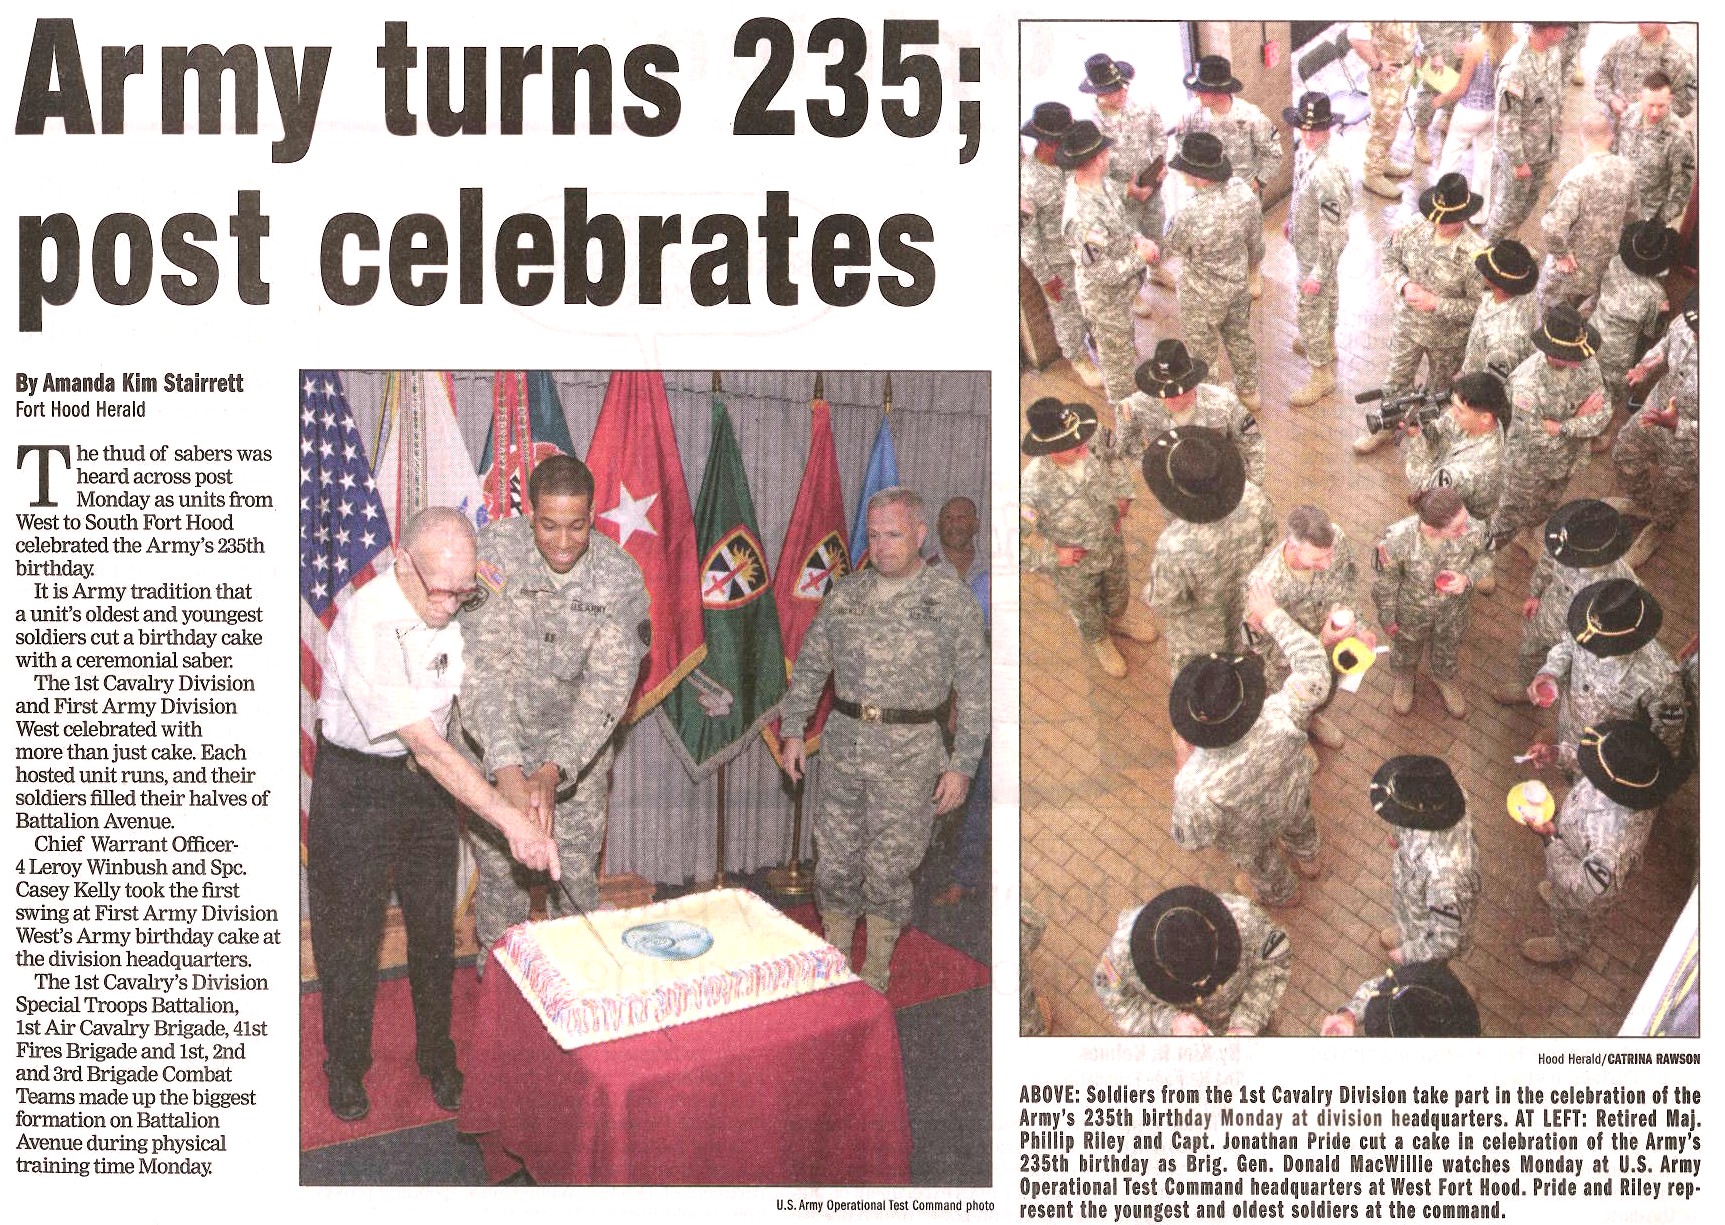 Army turns 235